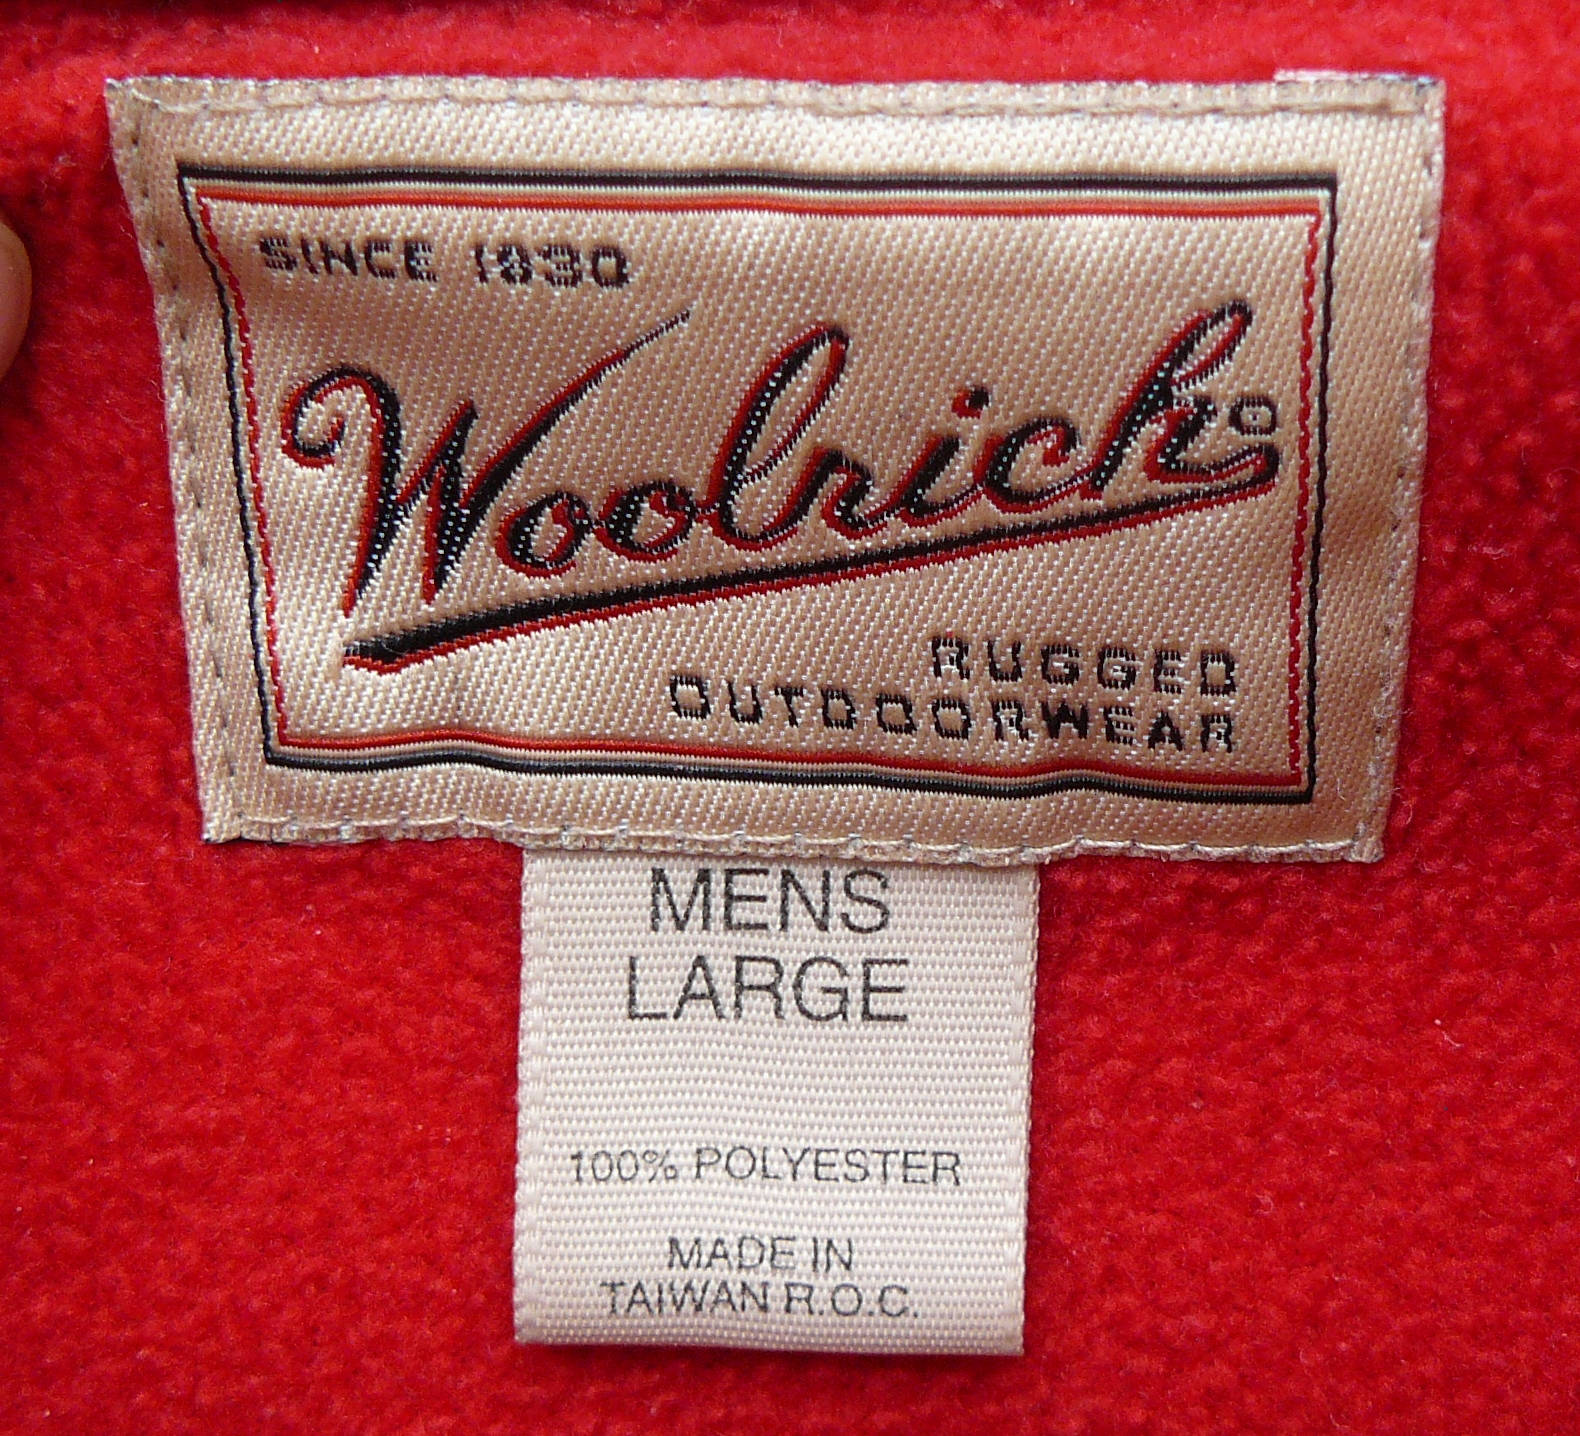 What year for this Woolrich fleece pullover? 70s? Tag reads 